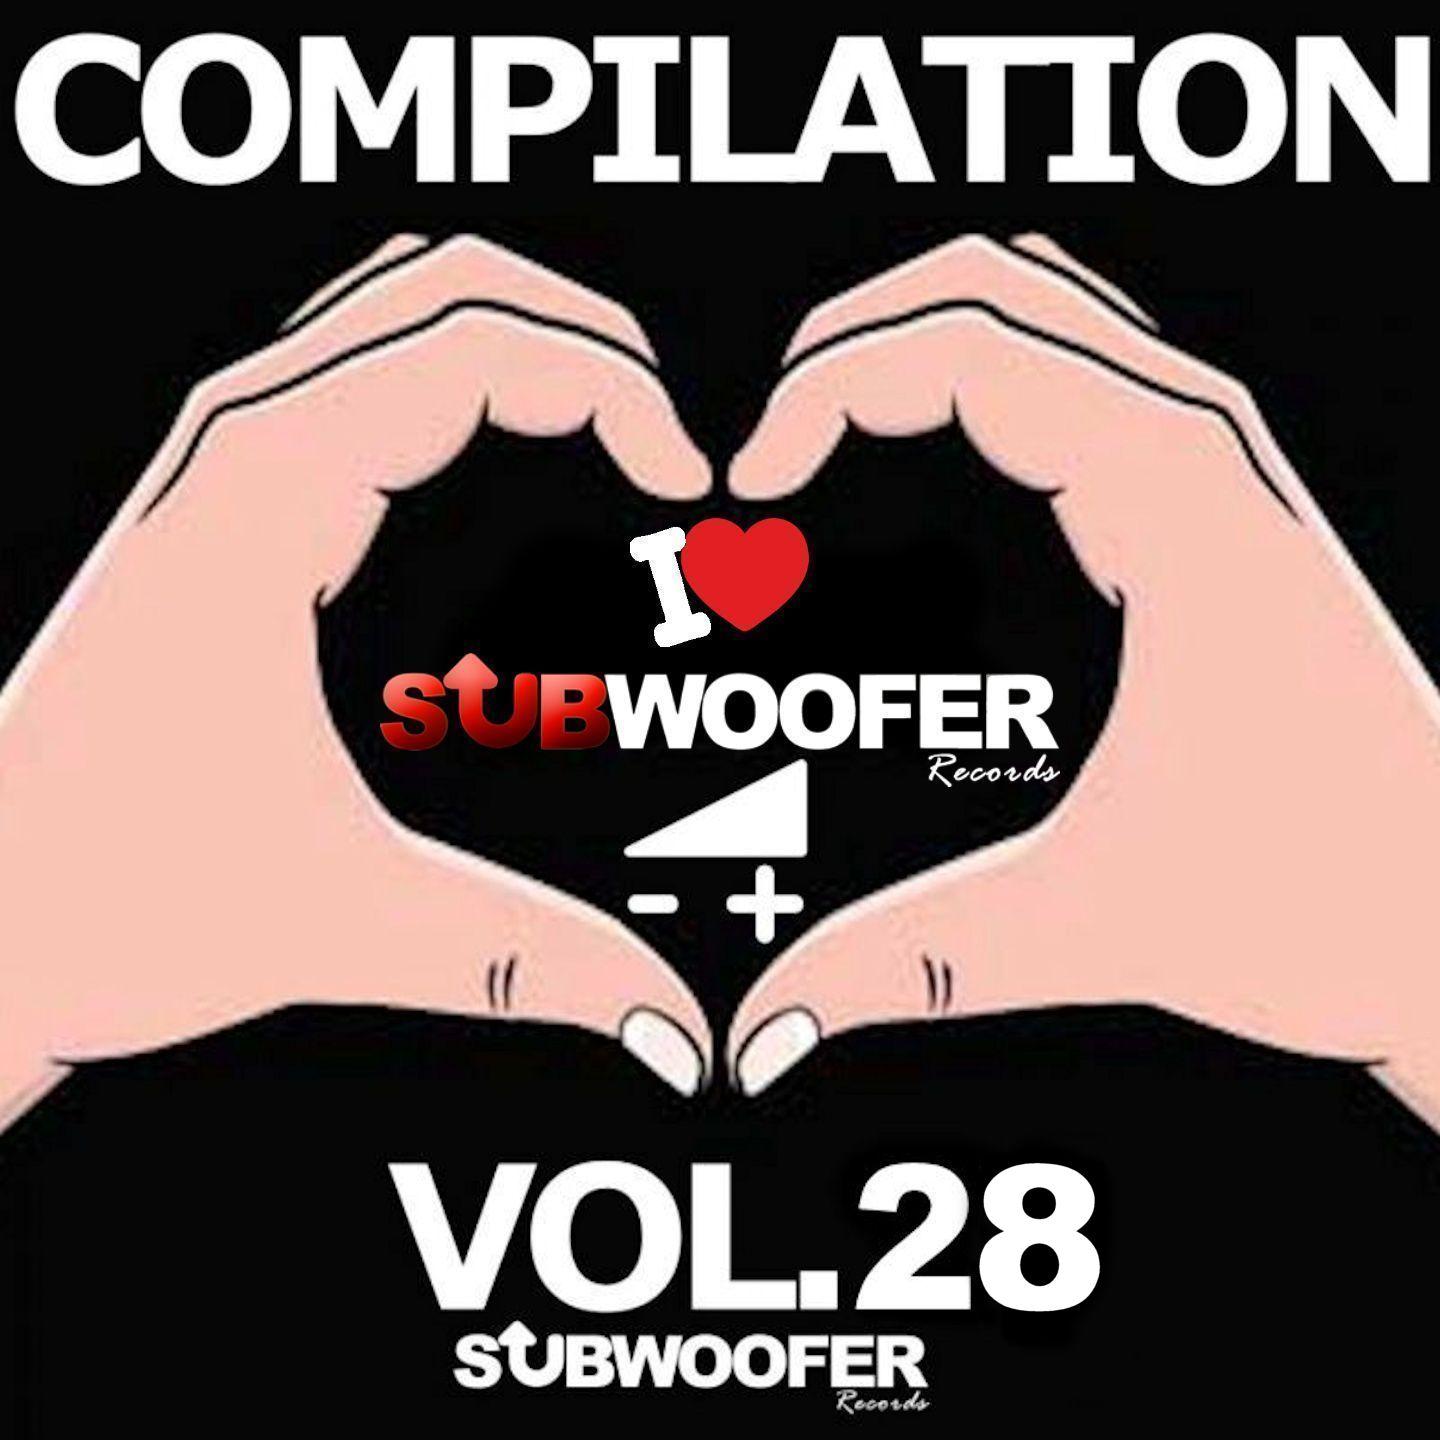 I Love Subwoofer Records Techno Compilation, Vol. 28 (Greatest Hits)